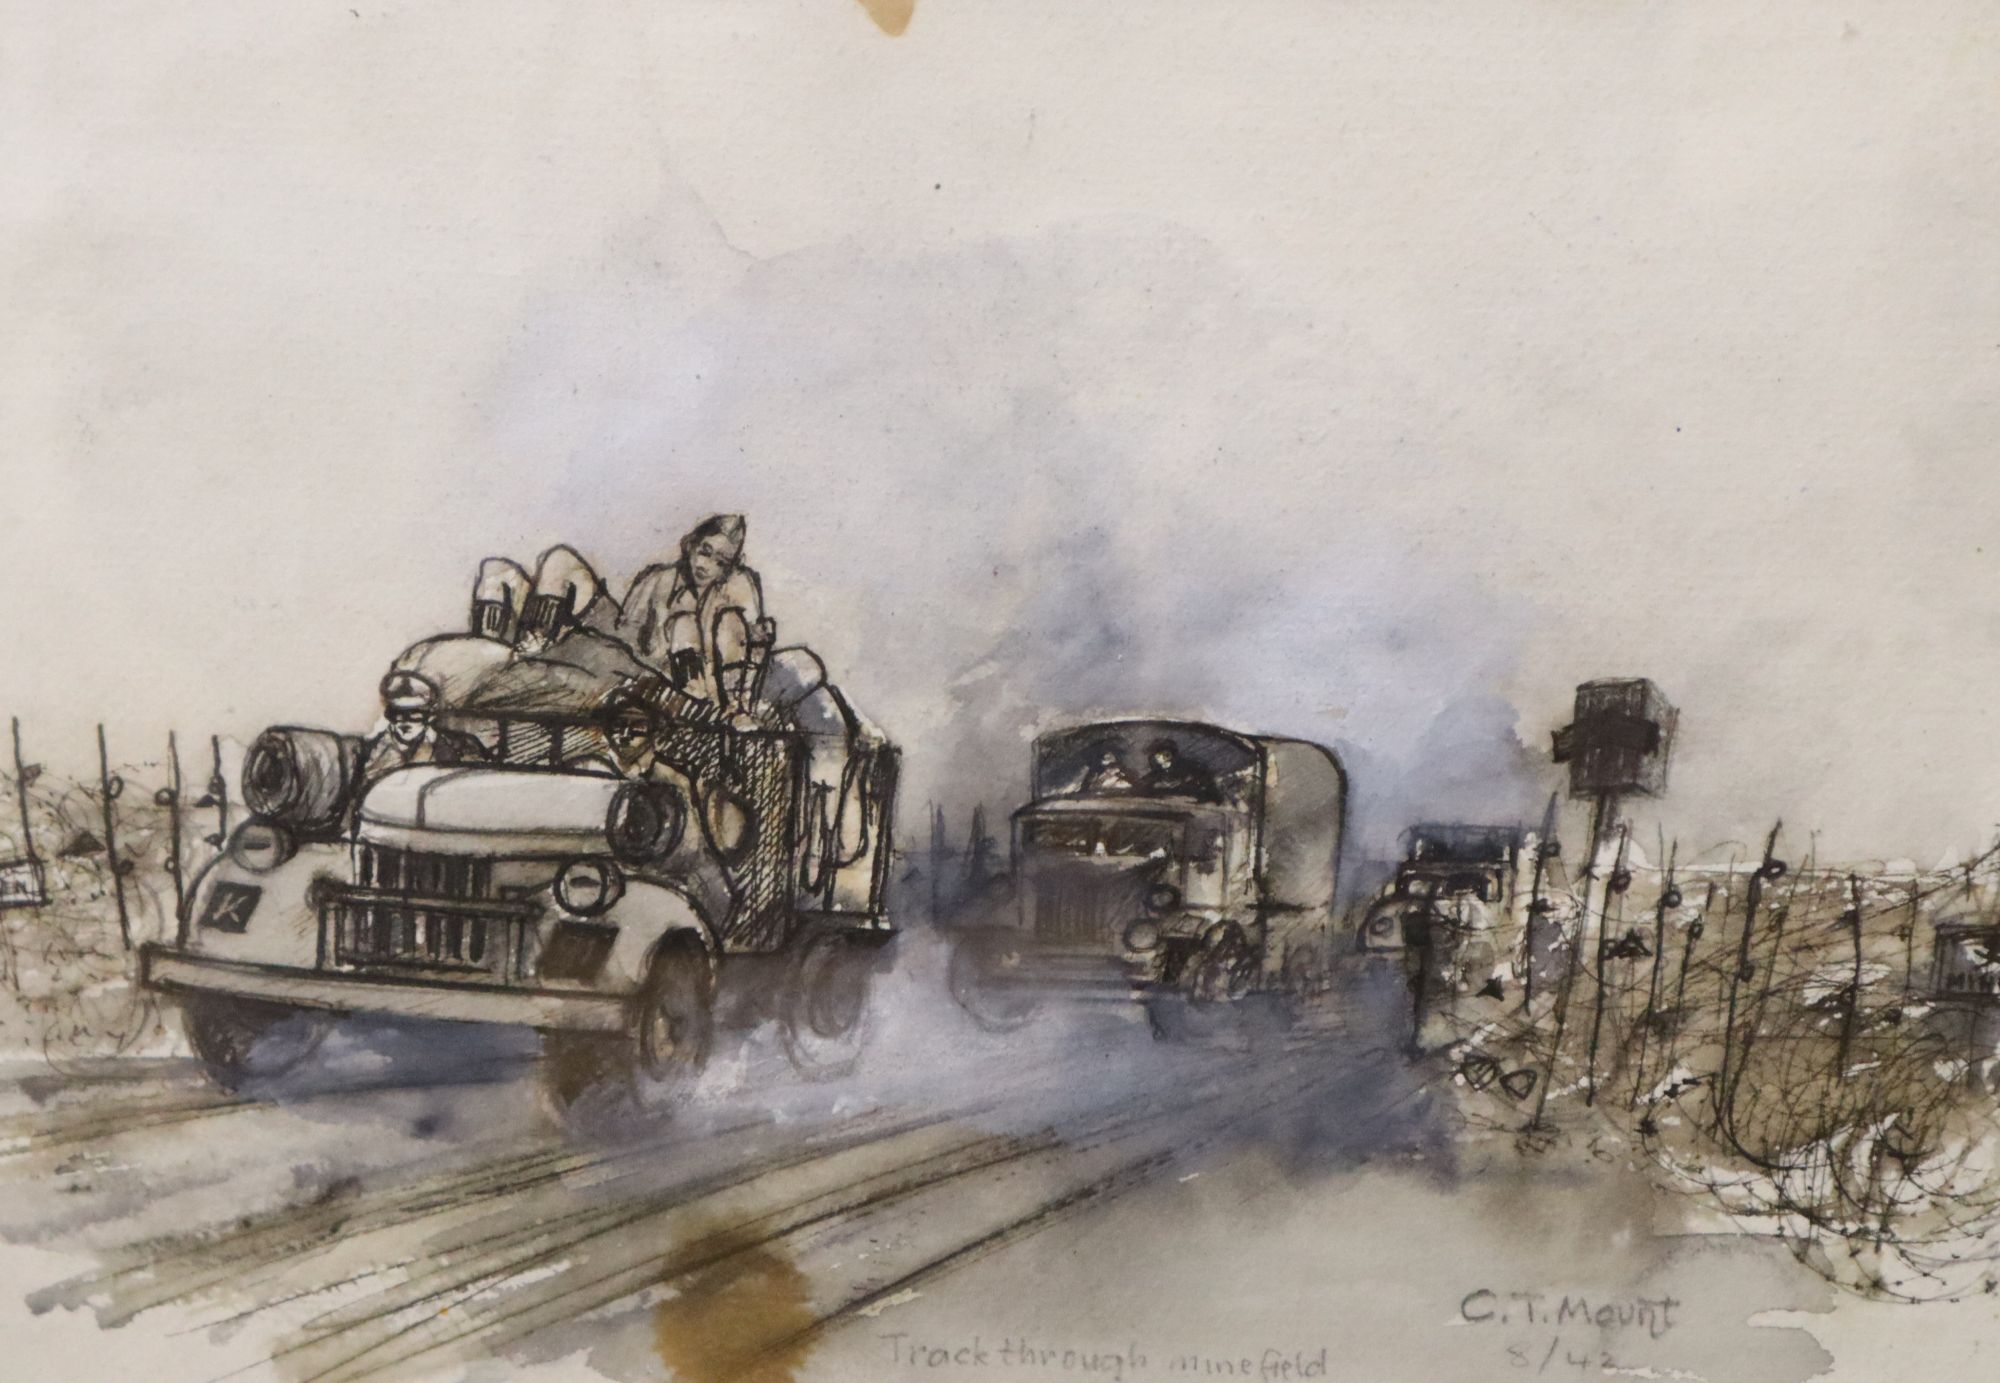 Cyril Mount (1920-2013), pencil drawing and ink and wash study, Brew Up, 9/42 and Track through a mine field, 8/42, 18 x 25cm